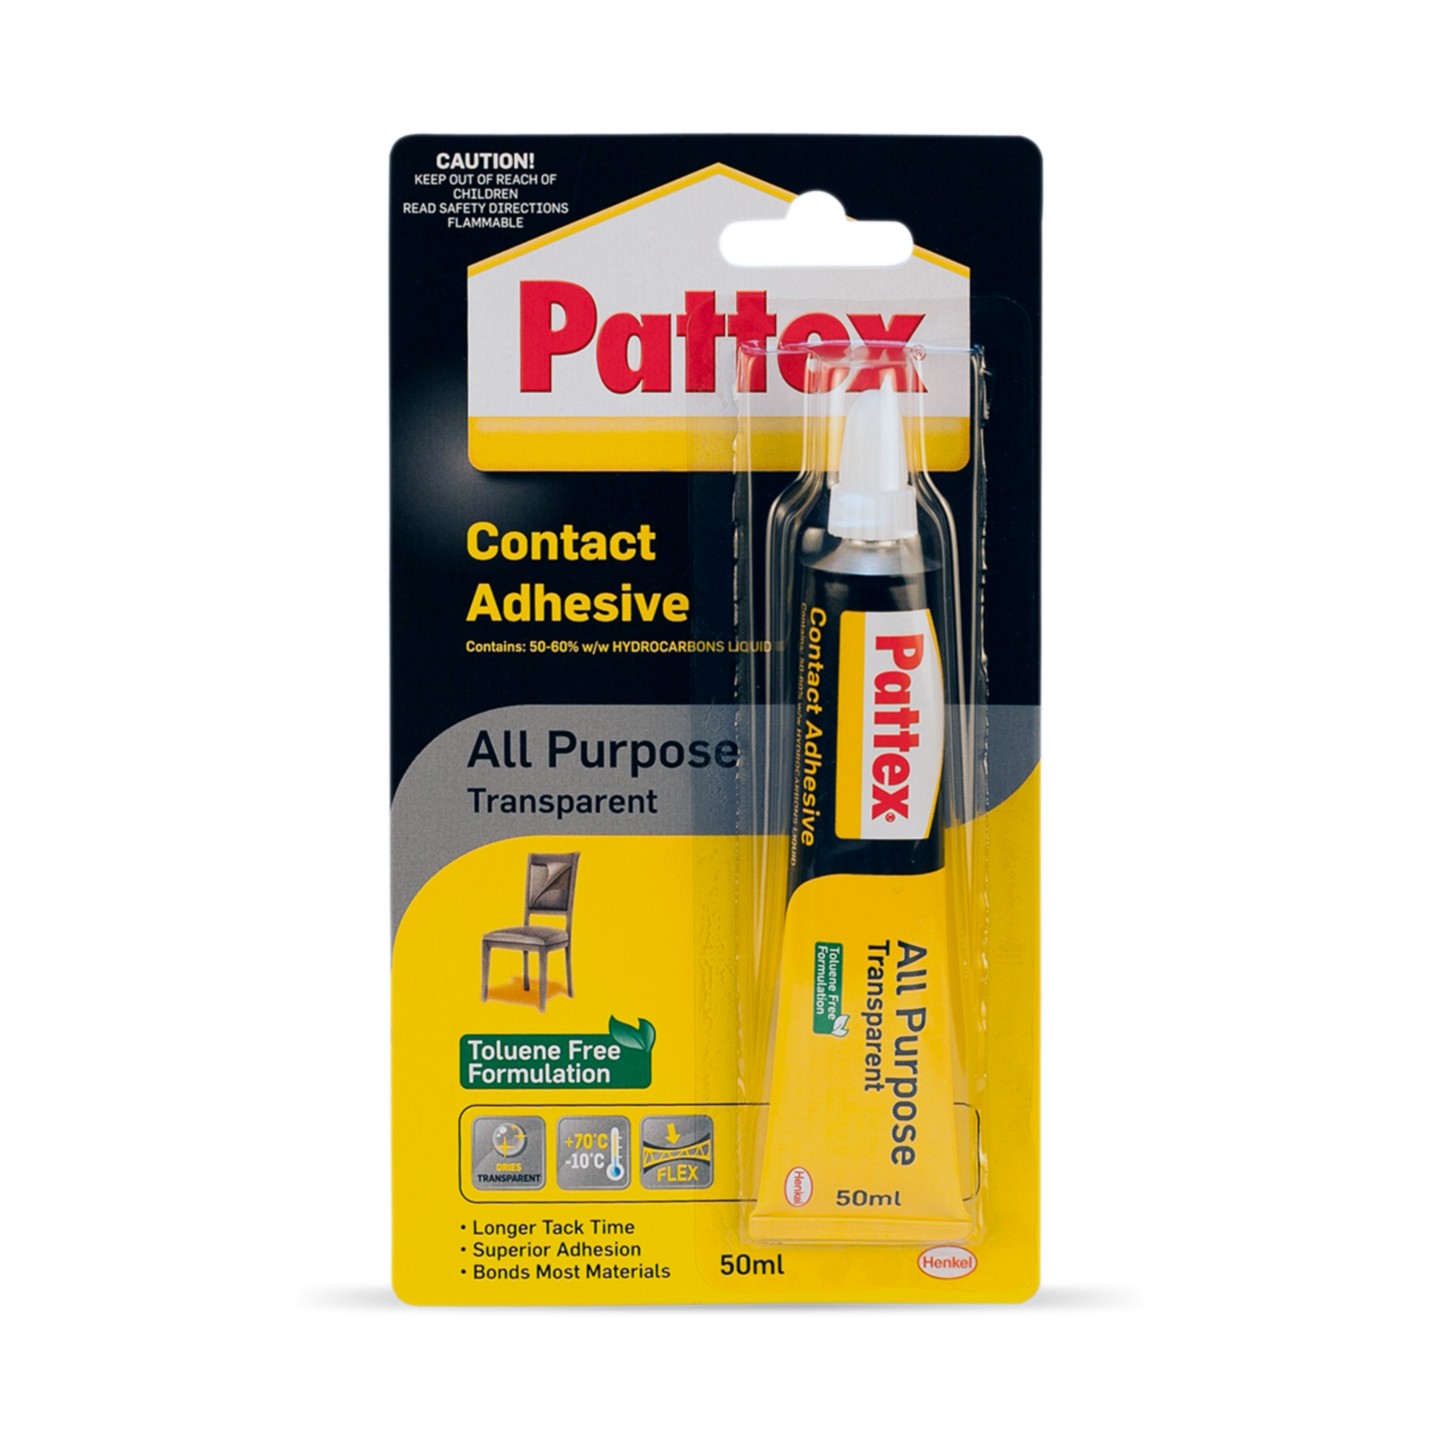 Contact Adhesive All Purpose Transparent